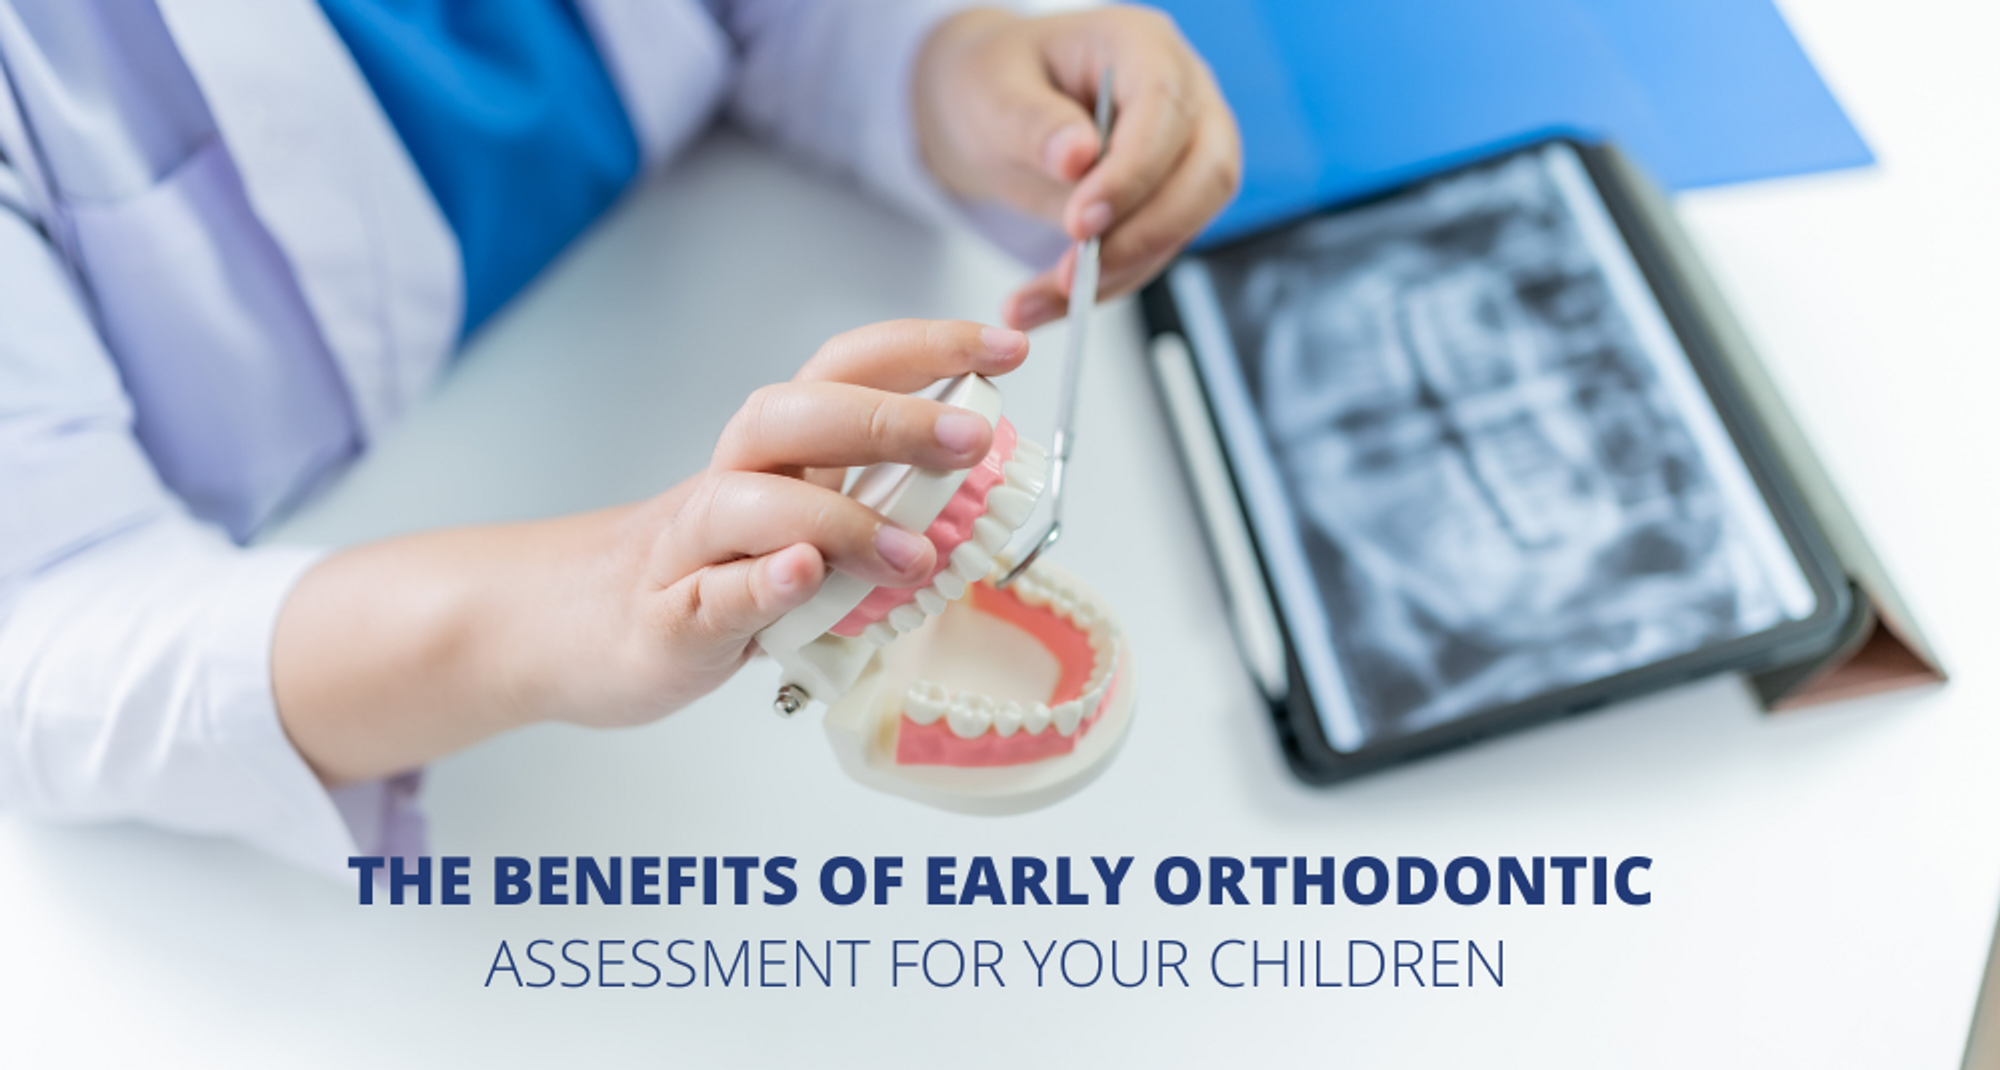 The Benefits of Early Orthodontic Assessment for Your Children